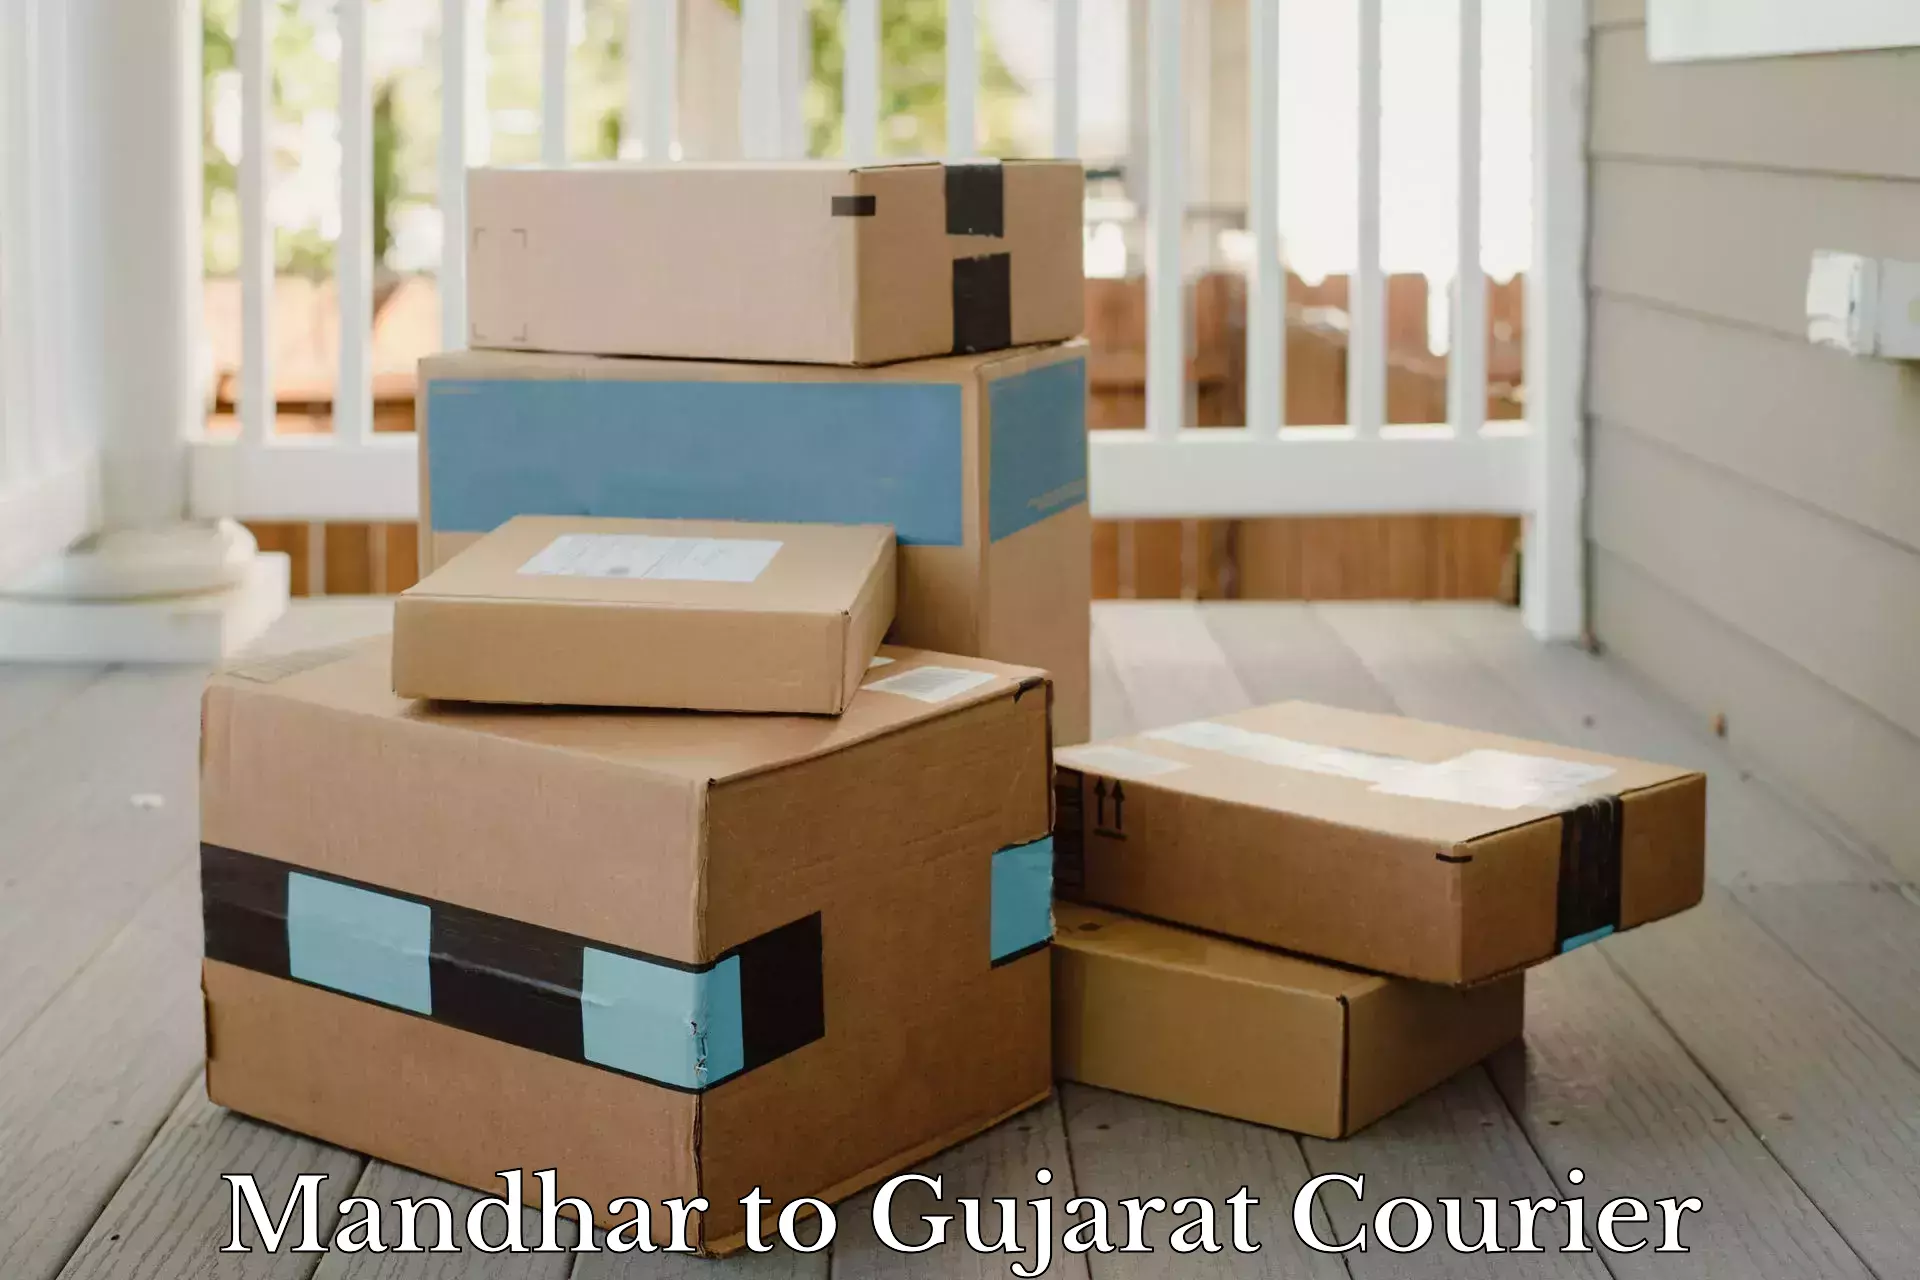 User-friendly delivery service Mandhar to Dharmasala